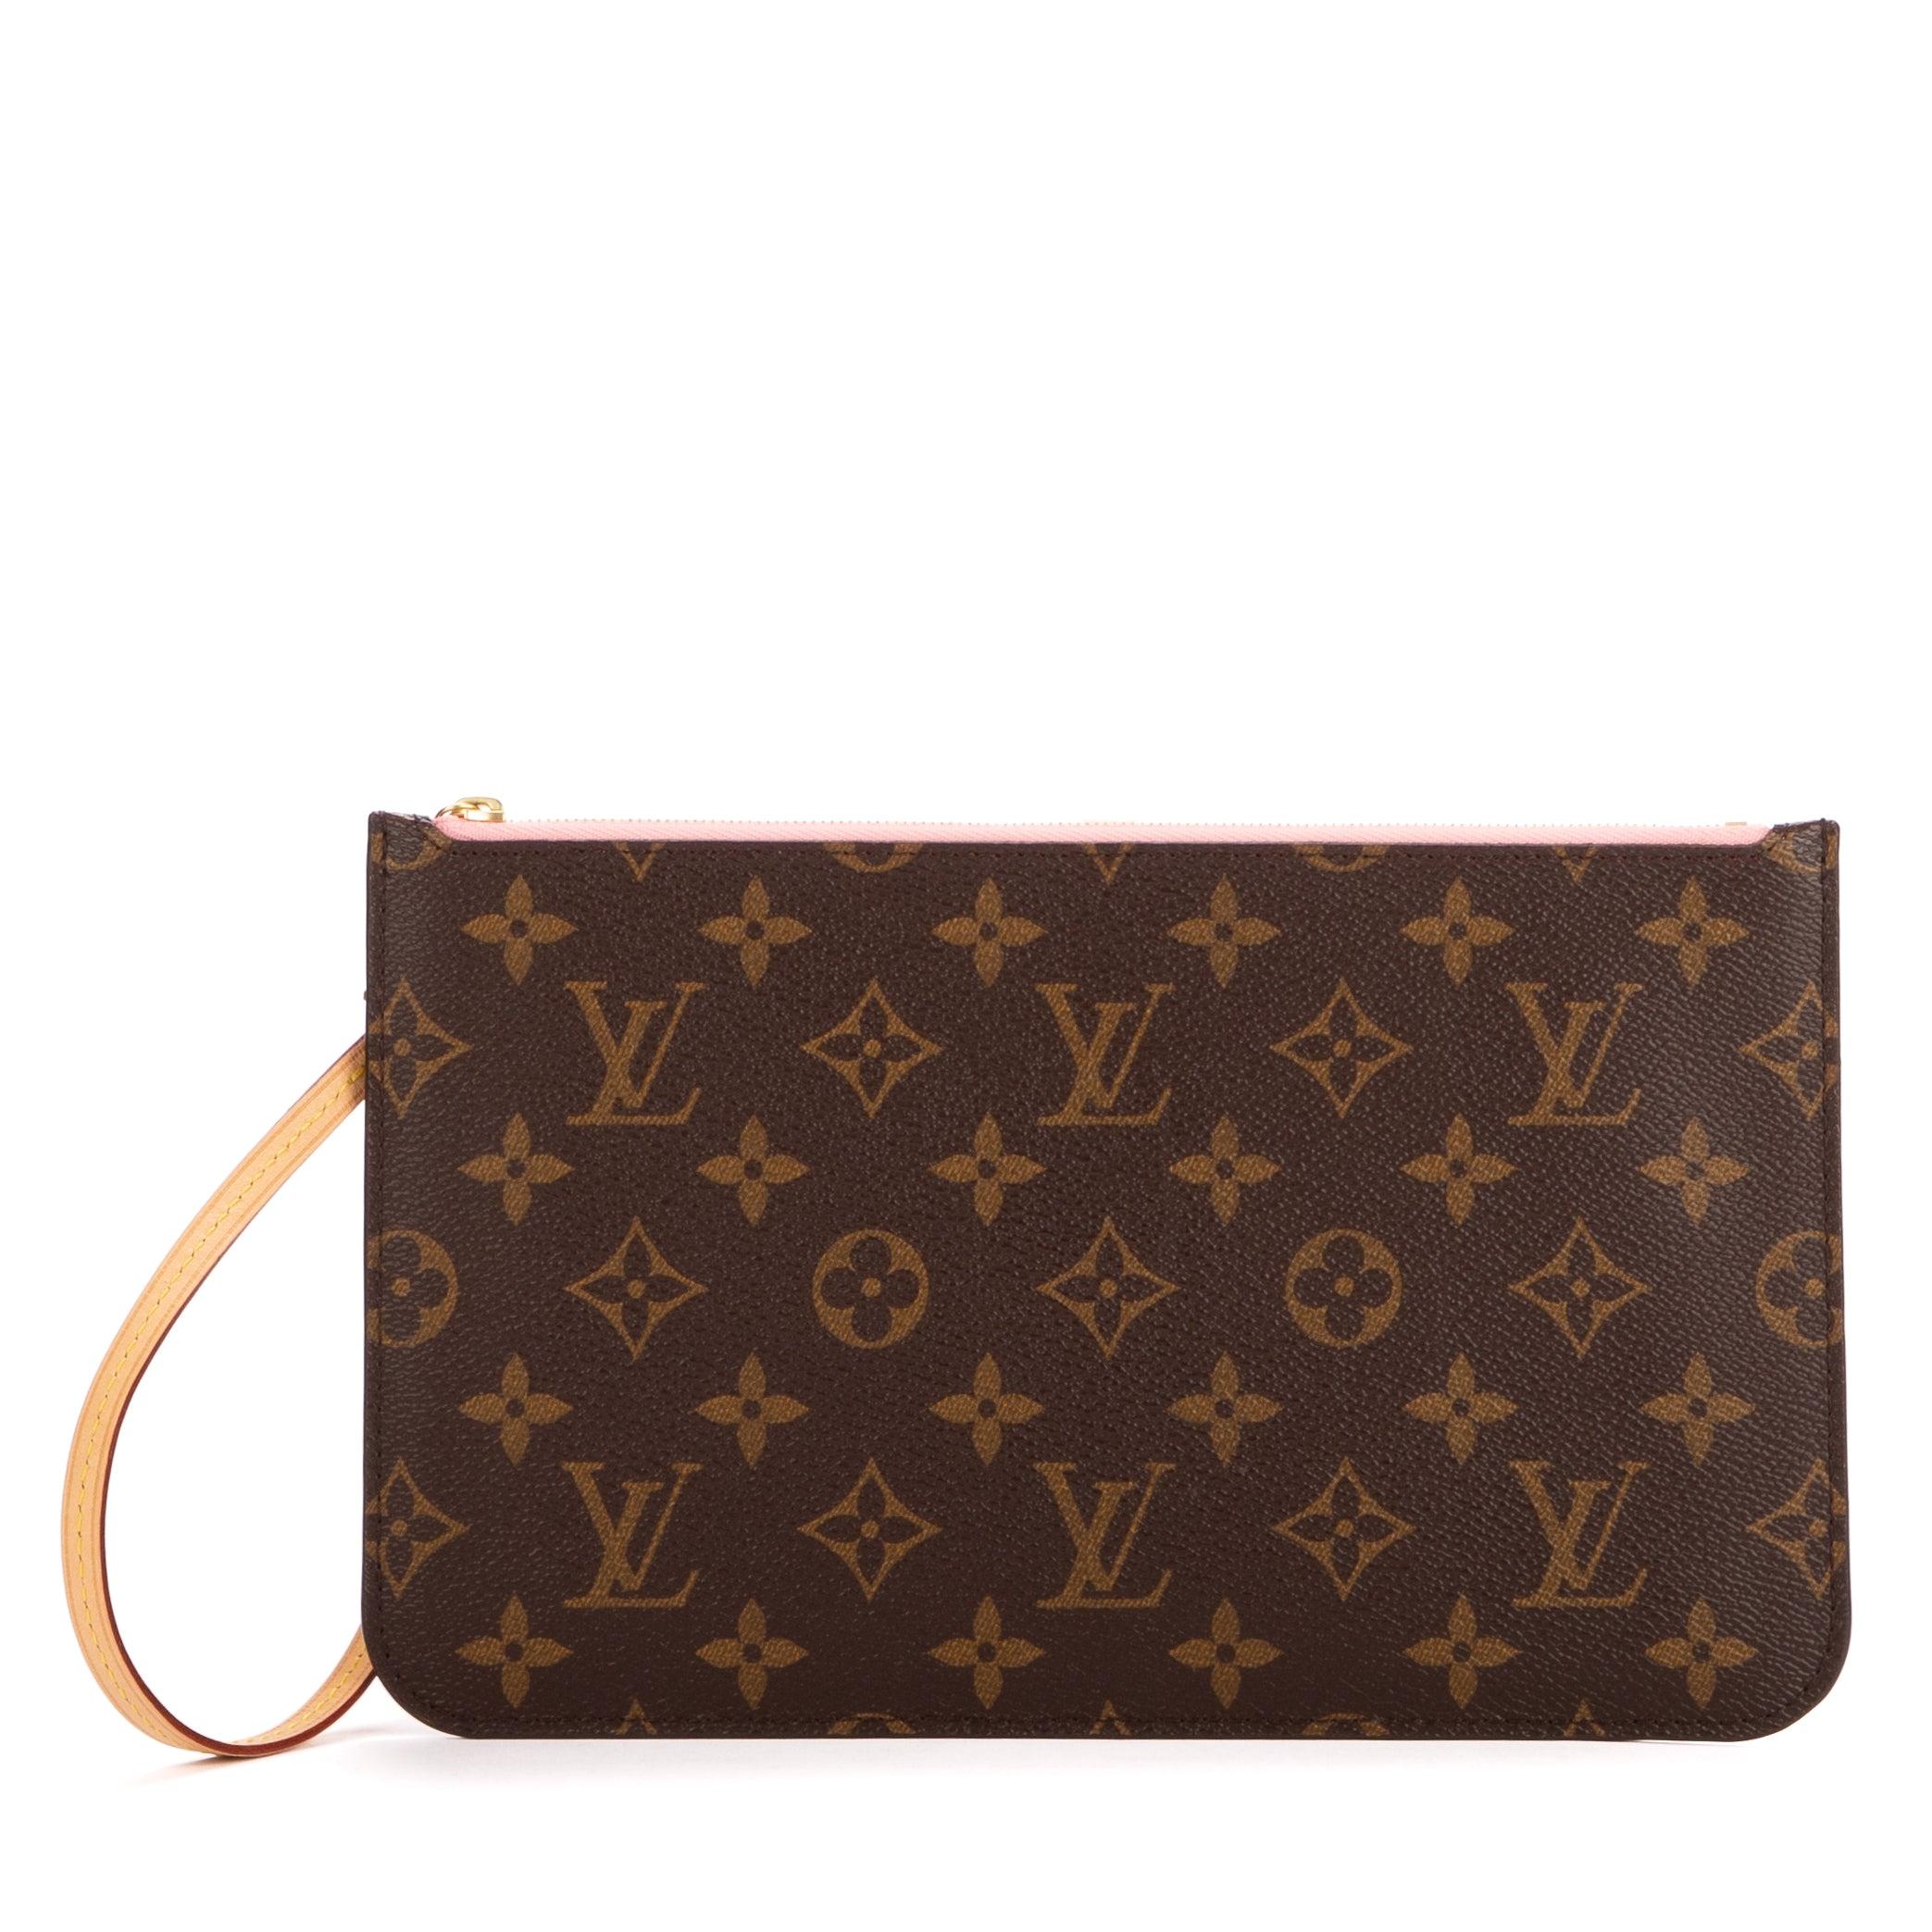 LOUIS VUITTON FIFA World Cup Limited Edition Clutch Bag Limited